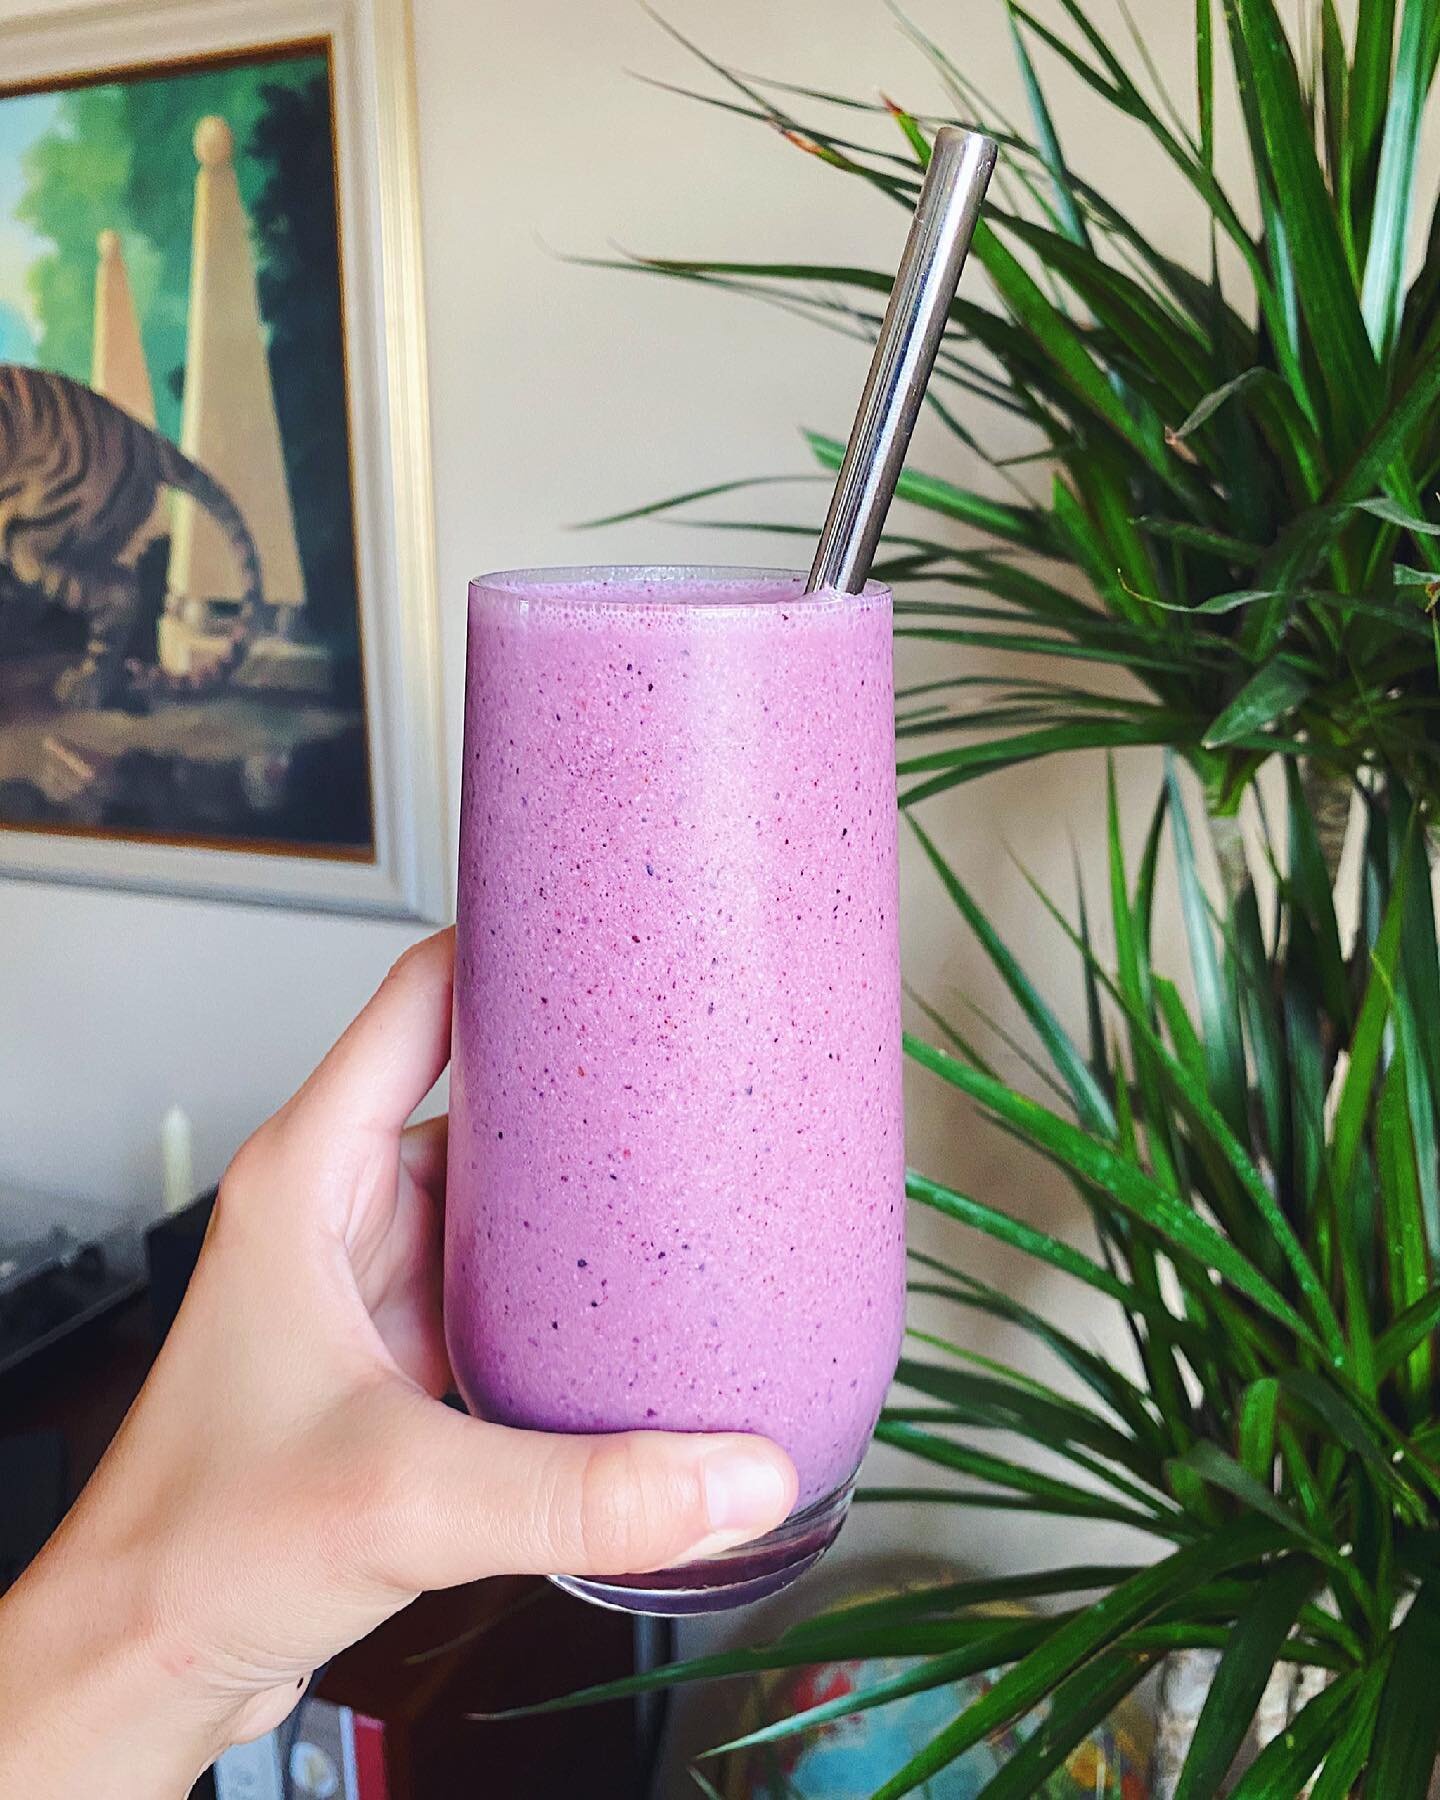 Have you tried adding cauliflower to your smoothies? It&rsquo;s not at all noticeable and adds some extra bulk, especially if you, like me, don&rsquo;t like overly sweet smoothies! I&rsquo;ve used whole florets in the past but lately have just been b